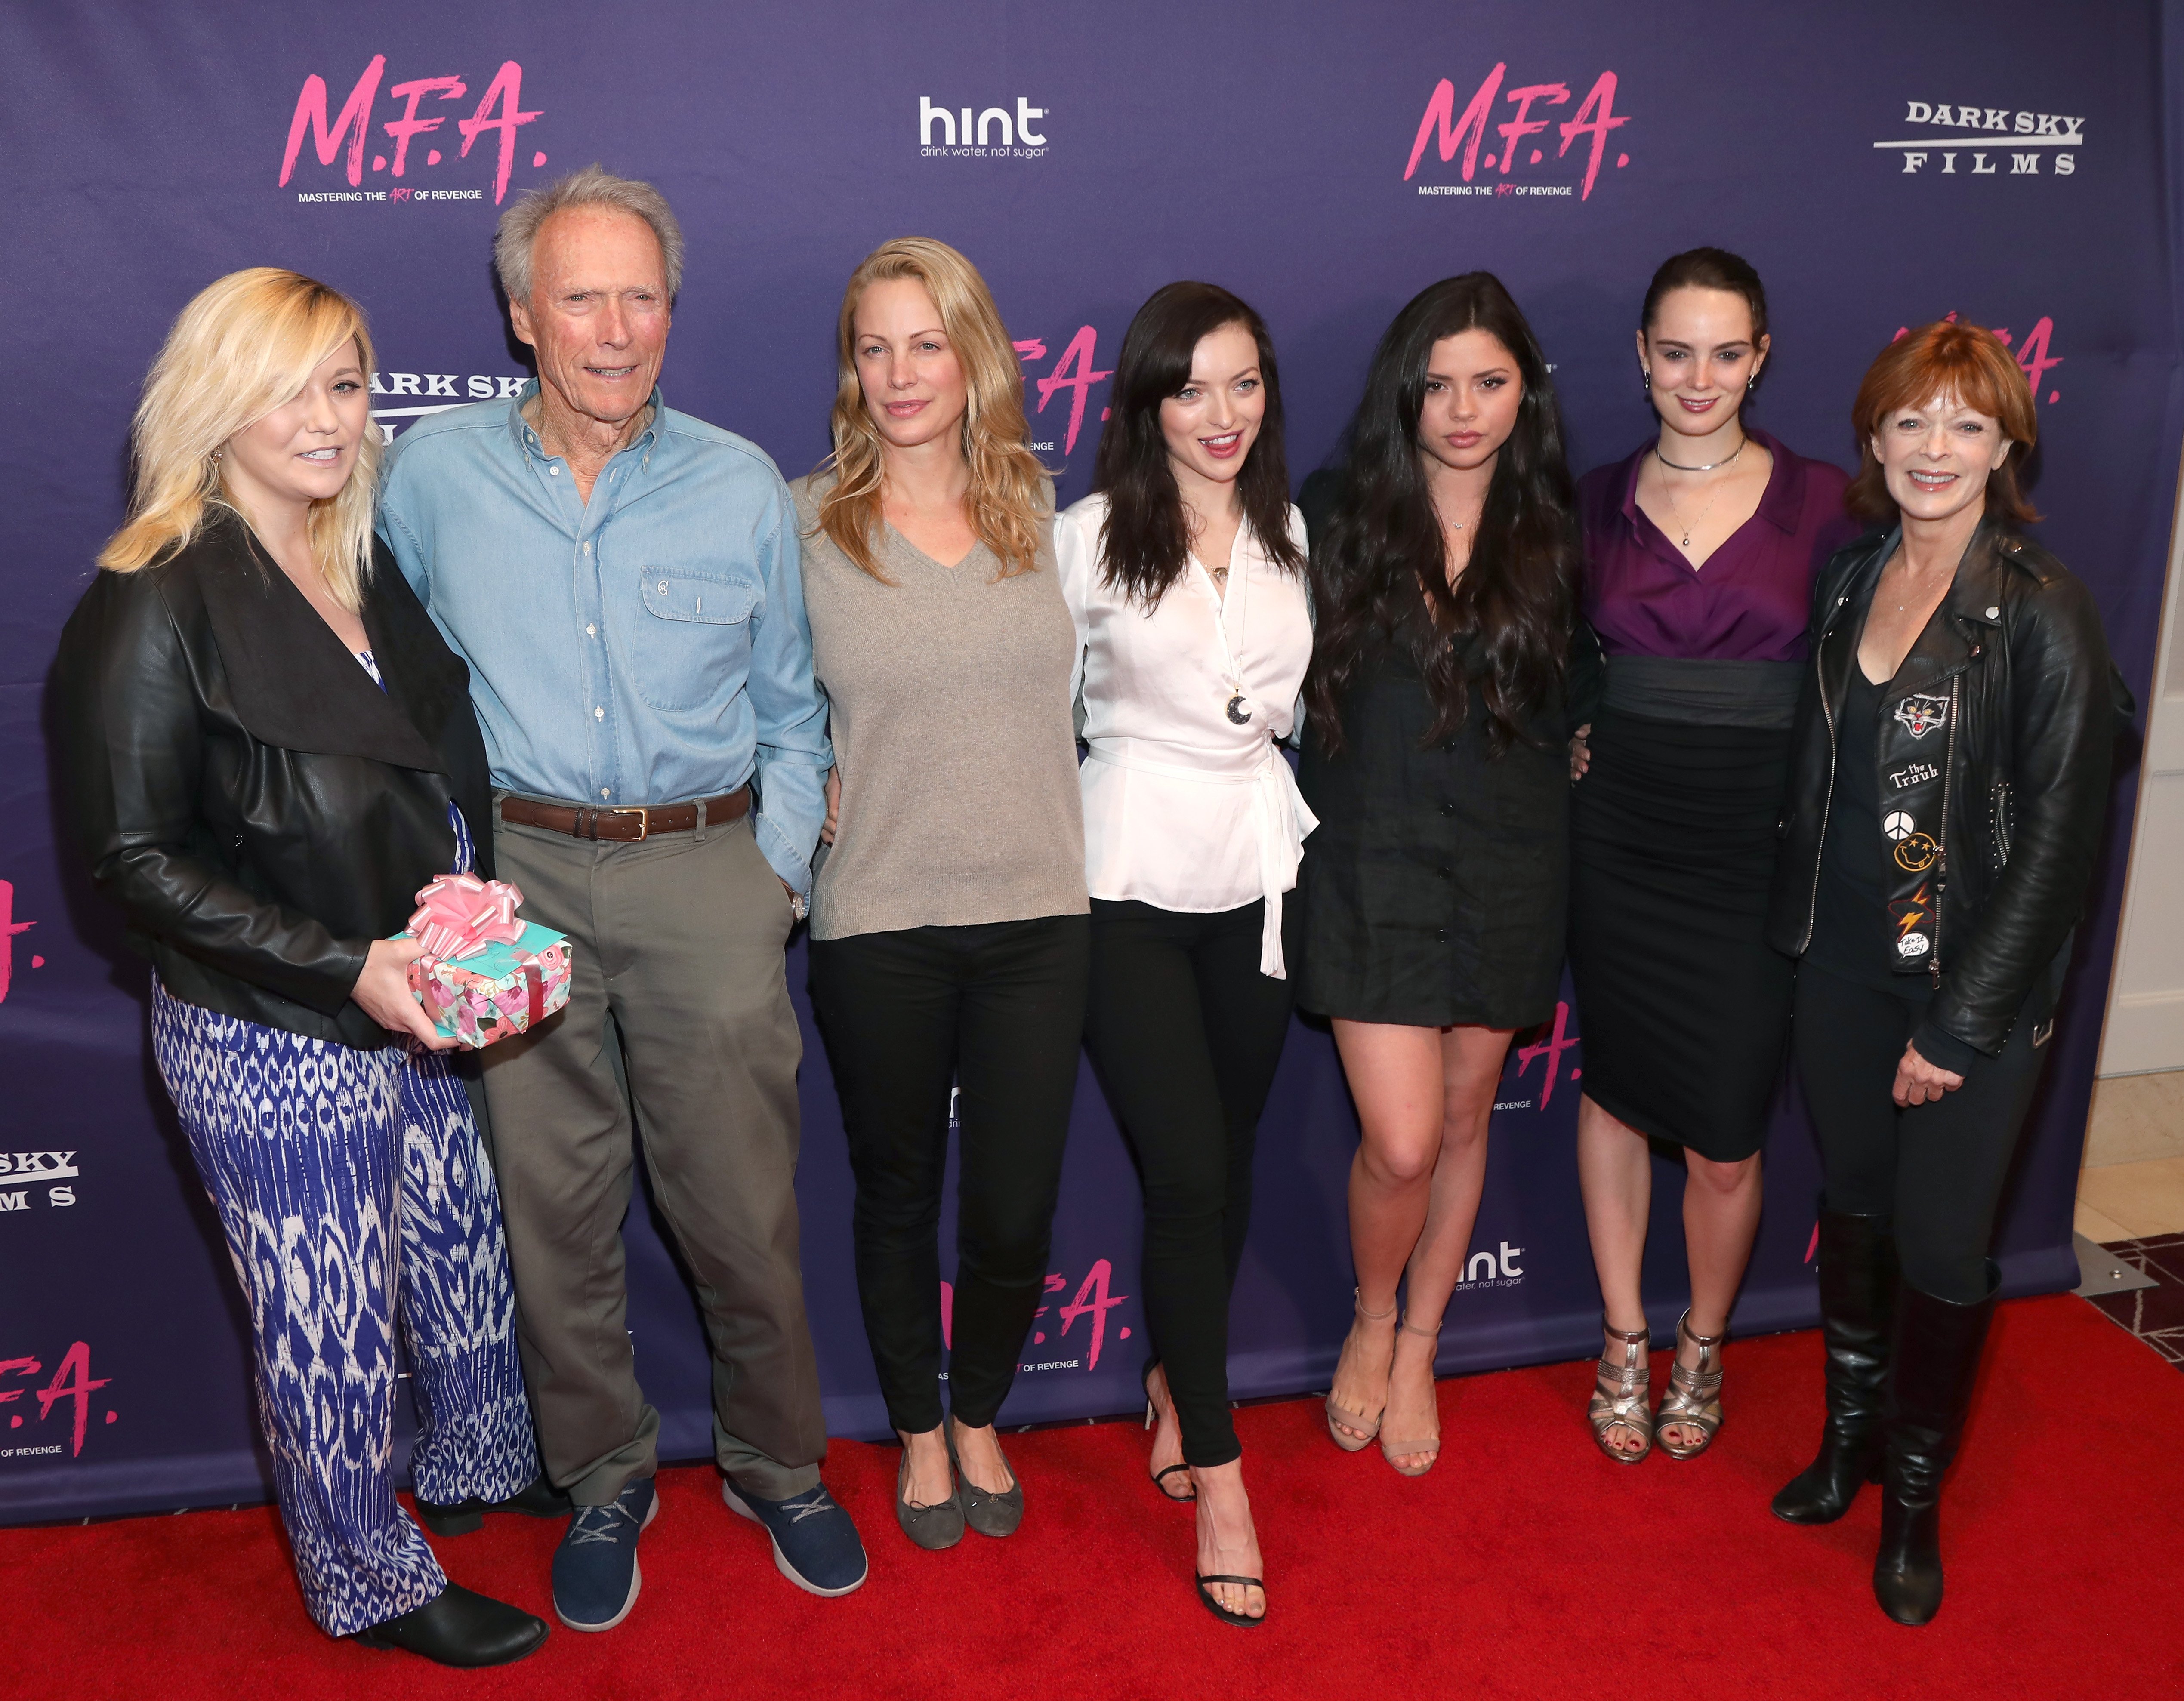 Kathryn Eastwood and her family at the premiere of "M.F.A." on October 2, 2017 | Source: Getty Images 